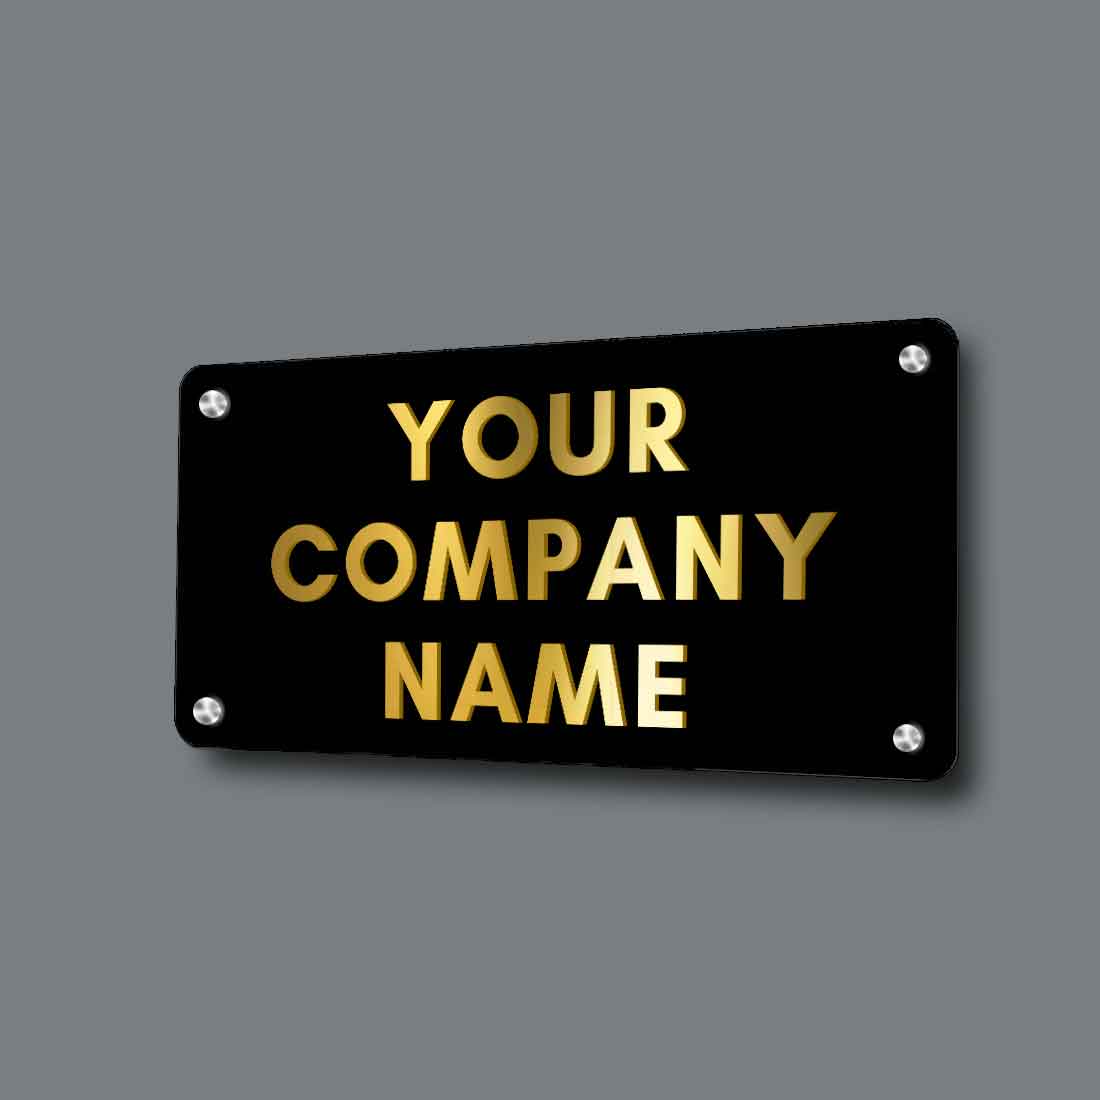 Personalized Stainless Steel Name Plates for Office Company Name Board - Add Name Logo